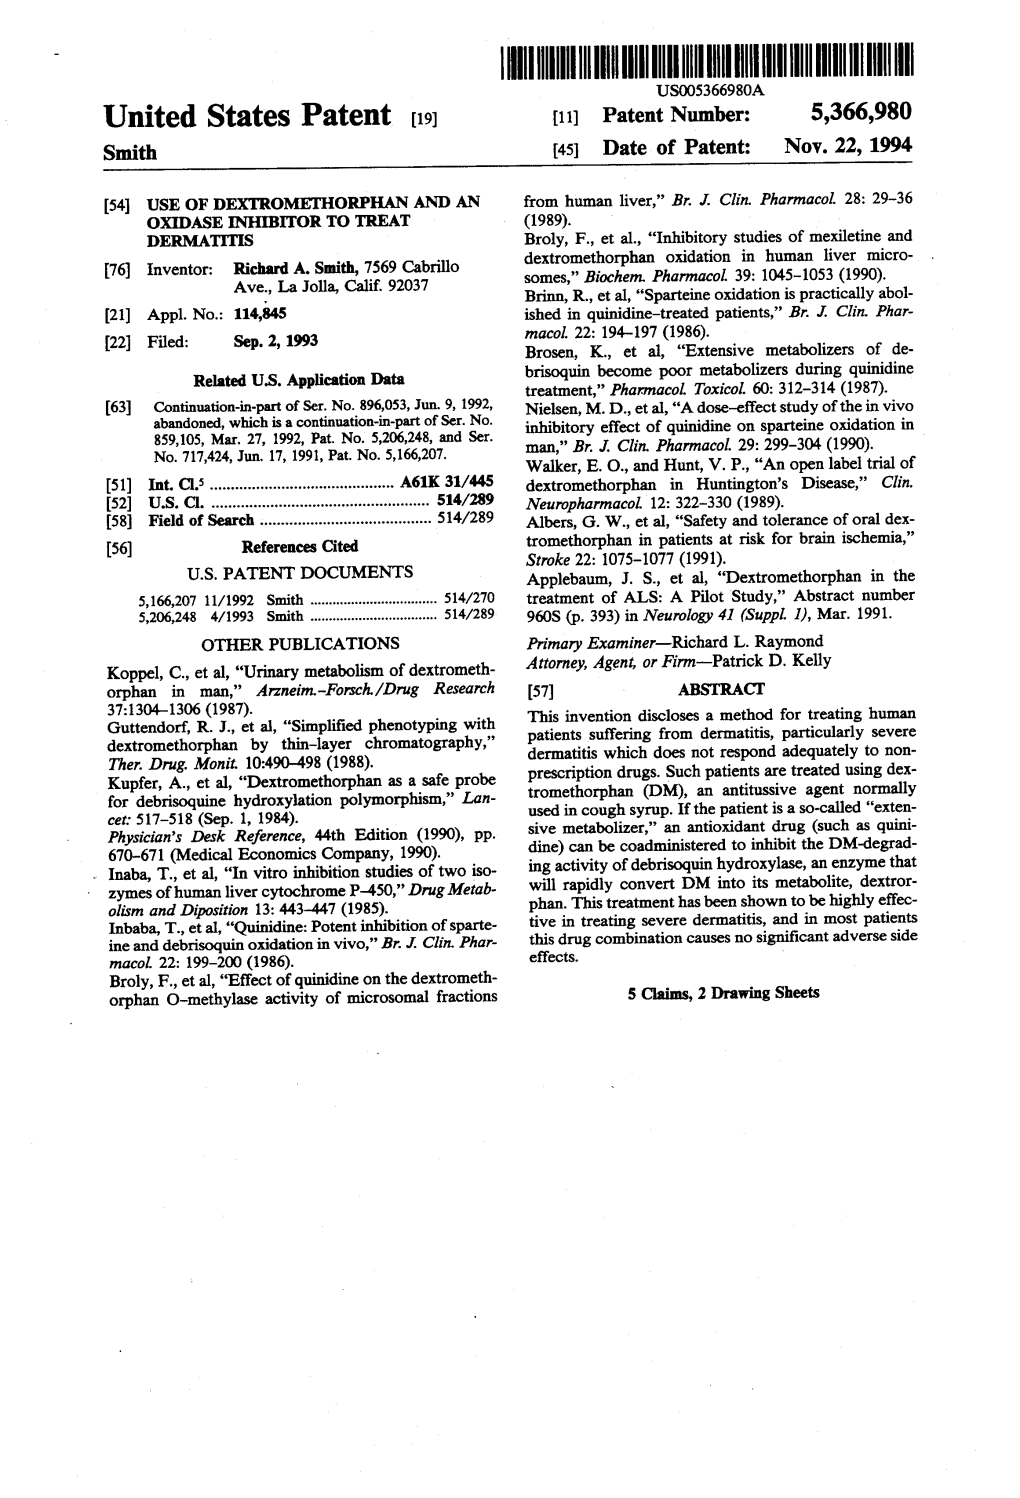 United States Patent (19) 11 Patent Number: 5,366,980 Smith 45 Date of Patent: Nov